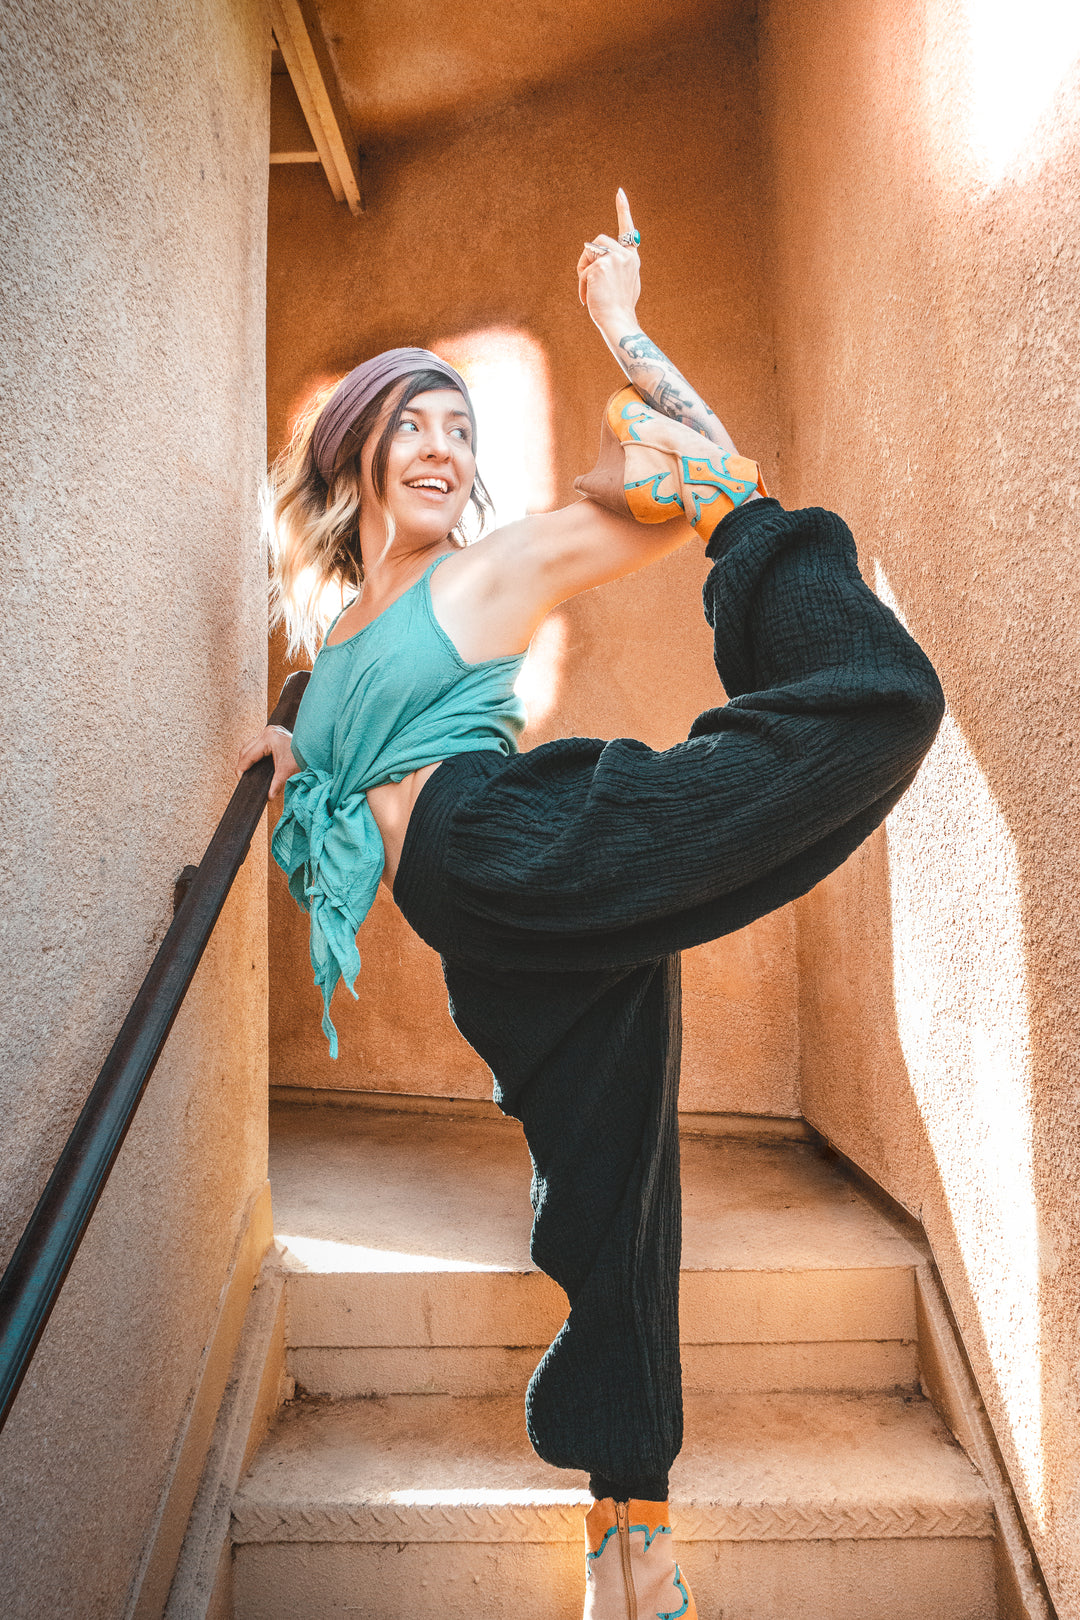 Model holds arabesque pose dressed in long yoga pants, tank top and head scarf.